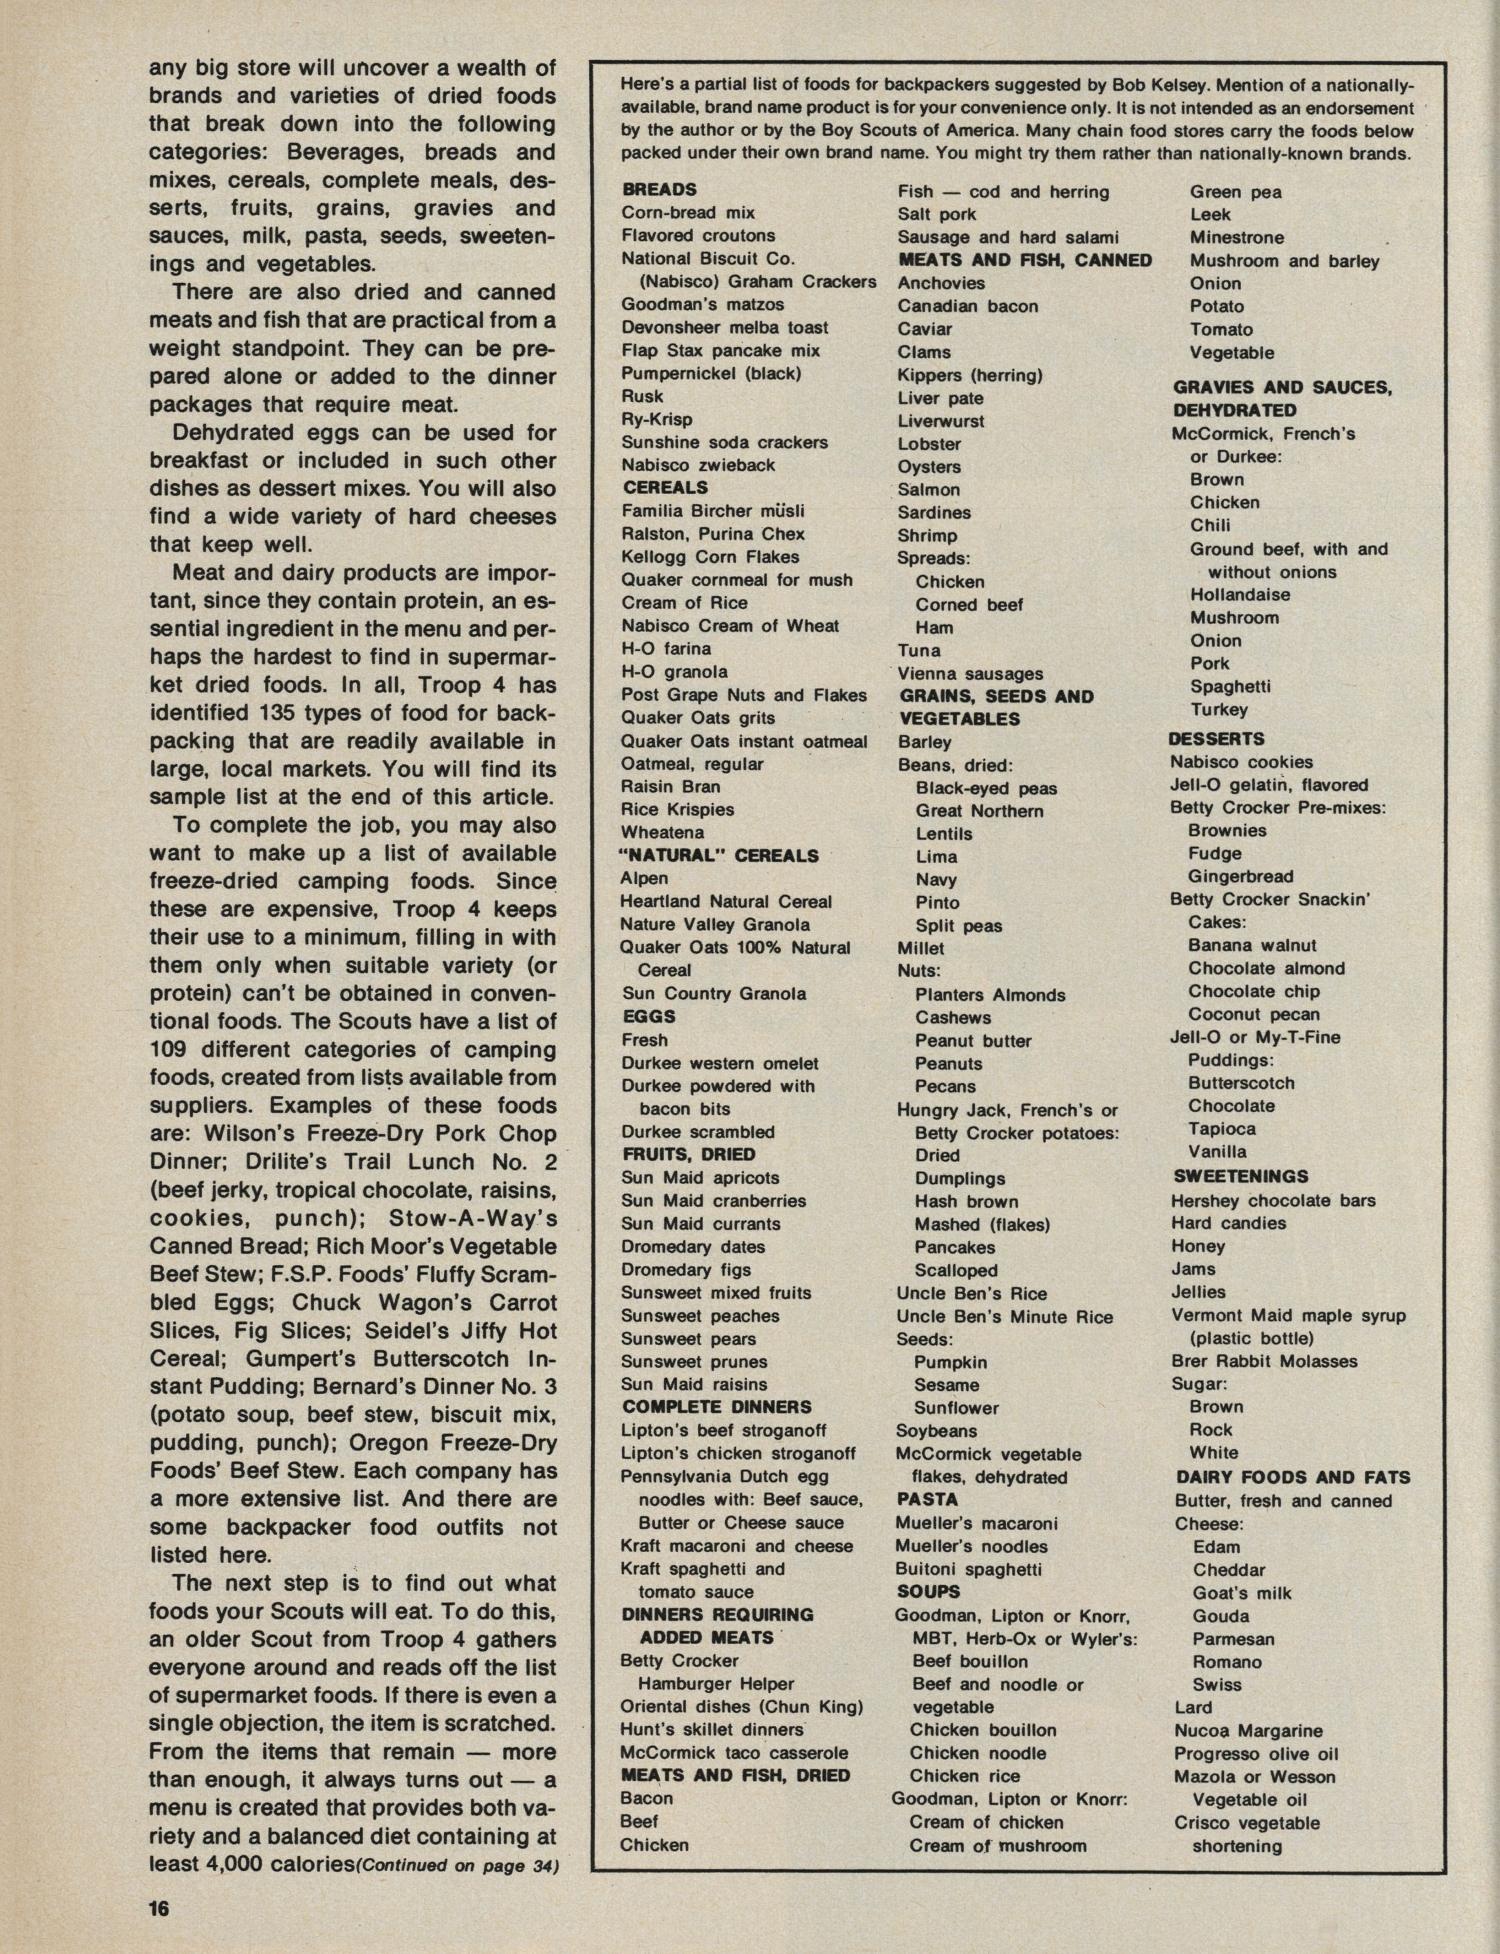 Scouting, Volume 62, Number 4, May-June 1974
                                                
                                                    16
                                                